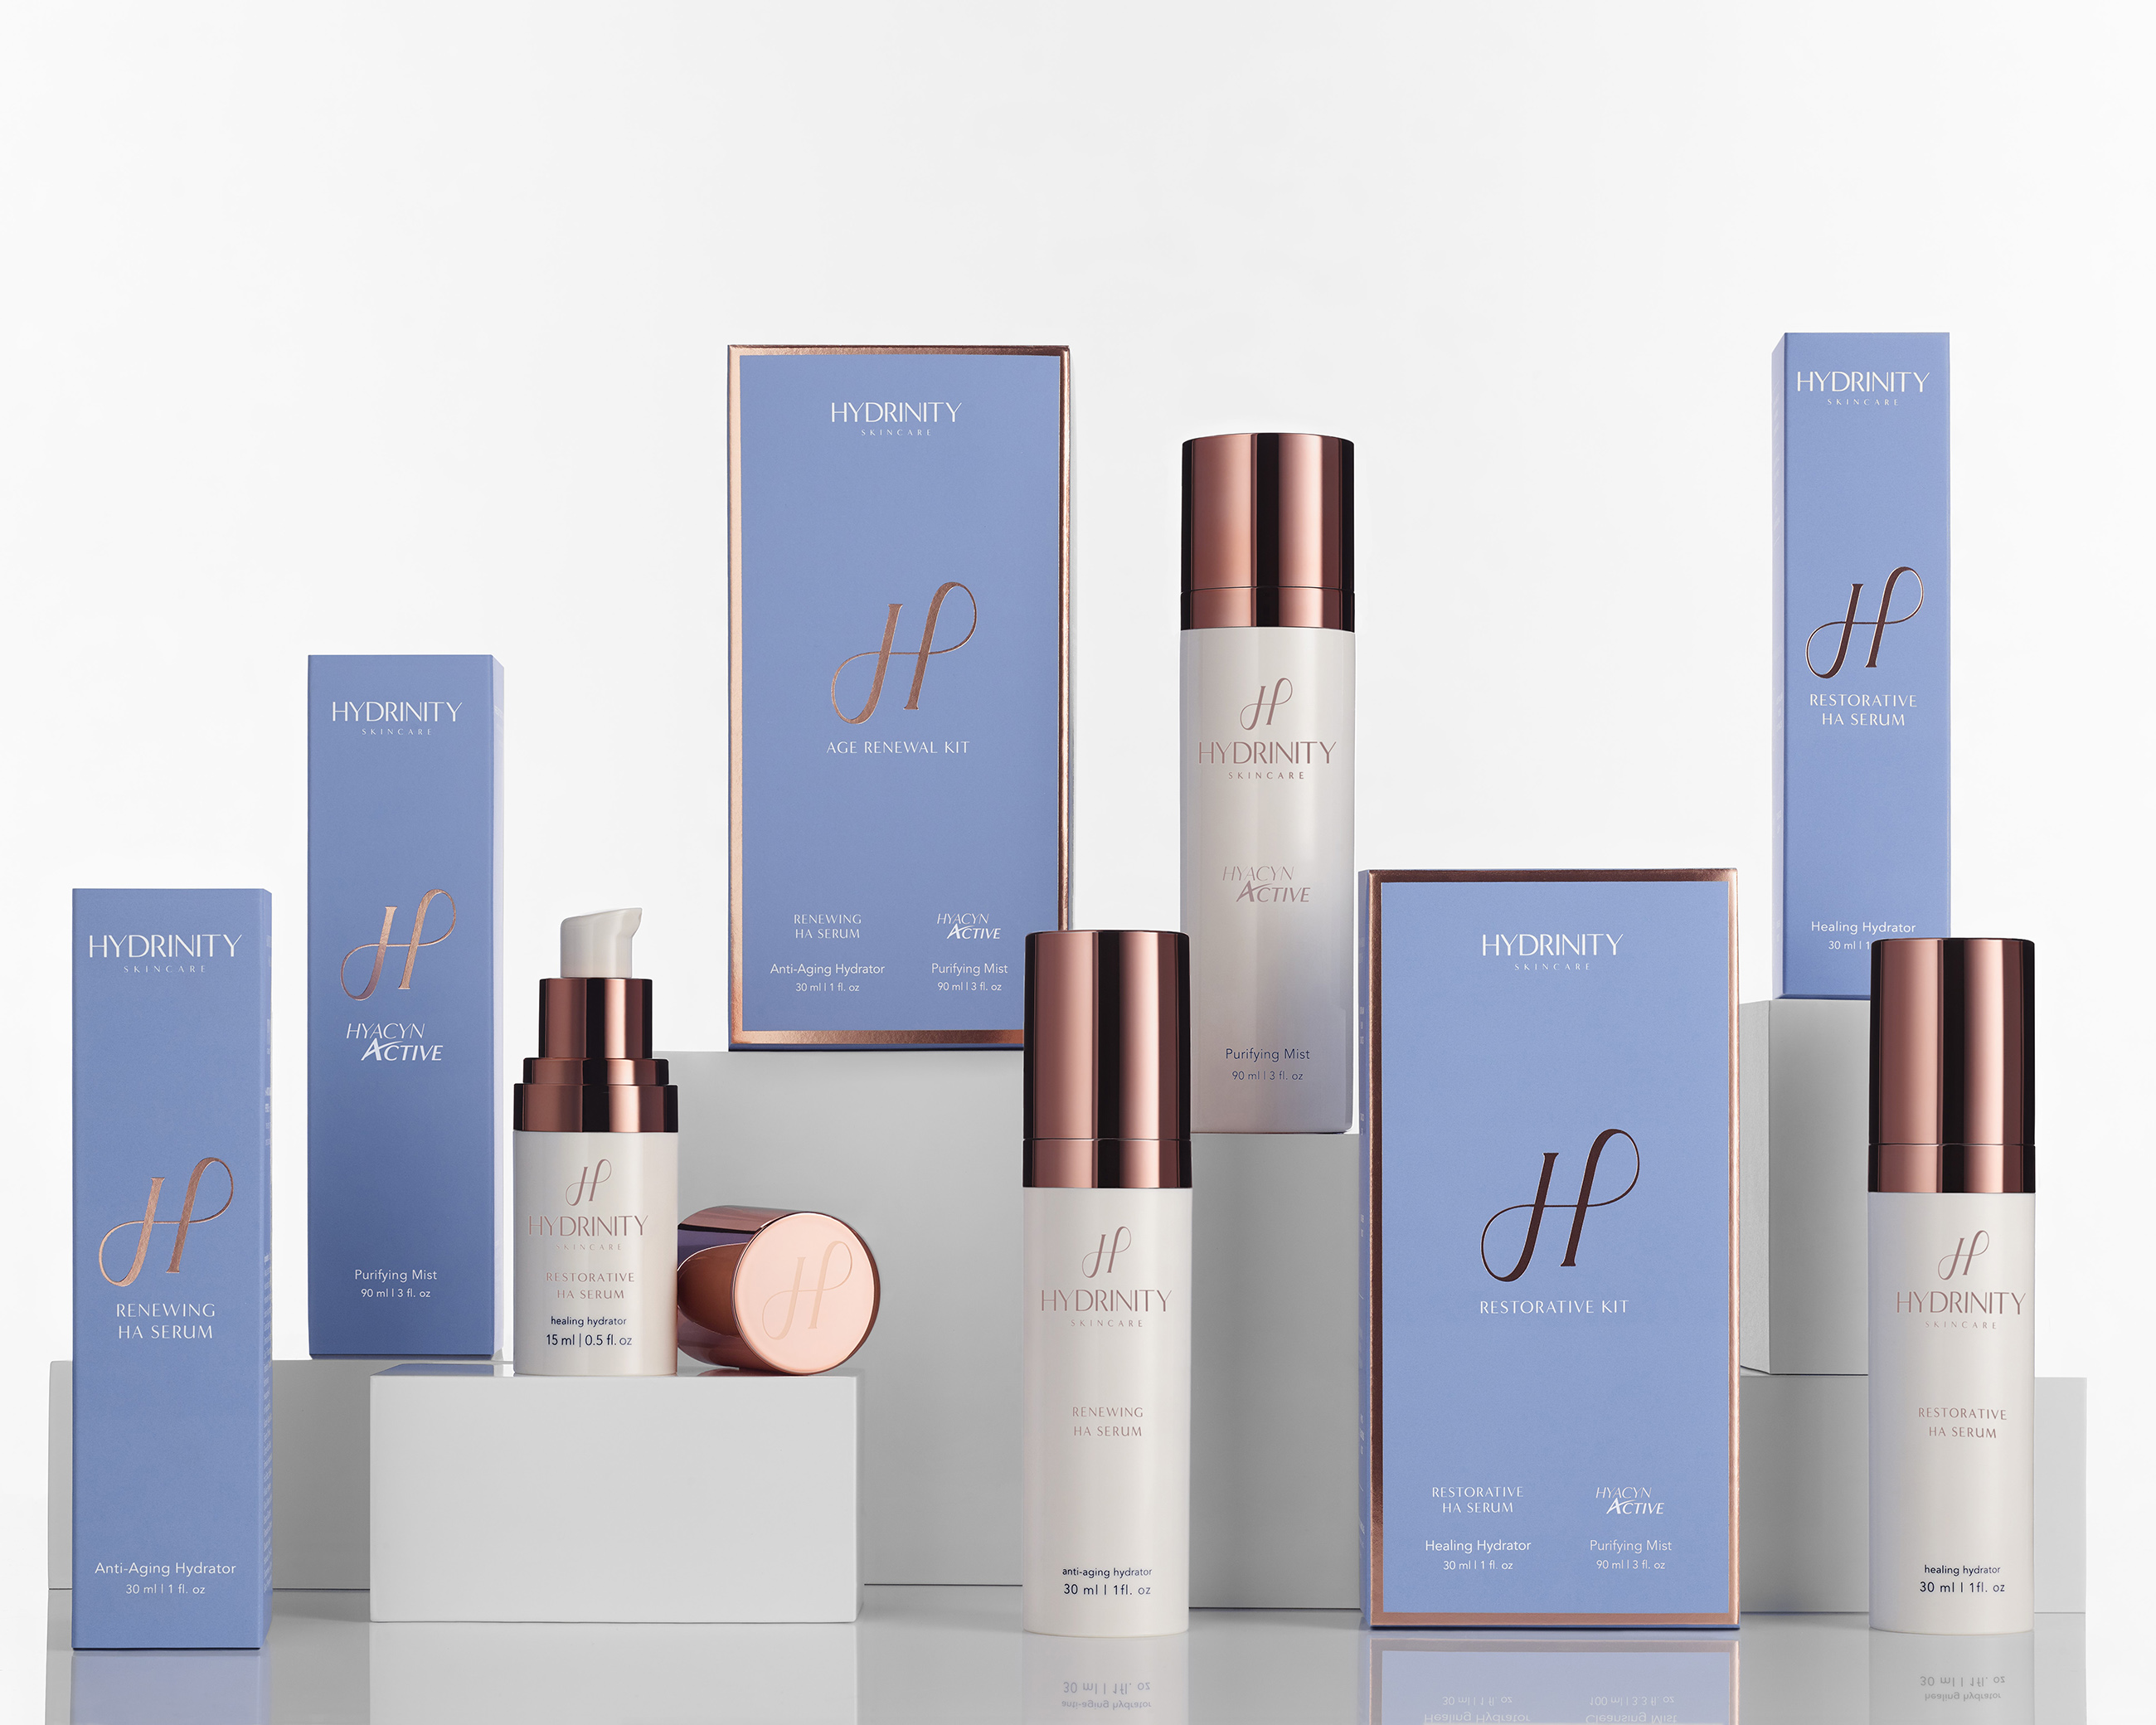 Hydrinity SkinCare offers a range of products designed to supercharge your skincare routine and transform your complexion.